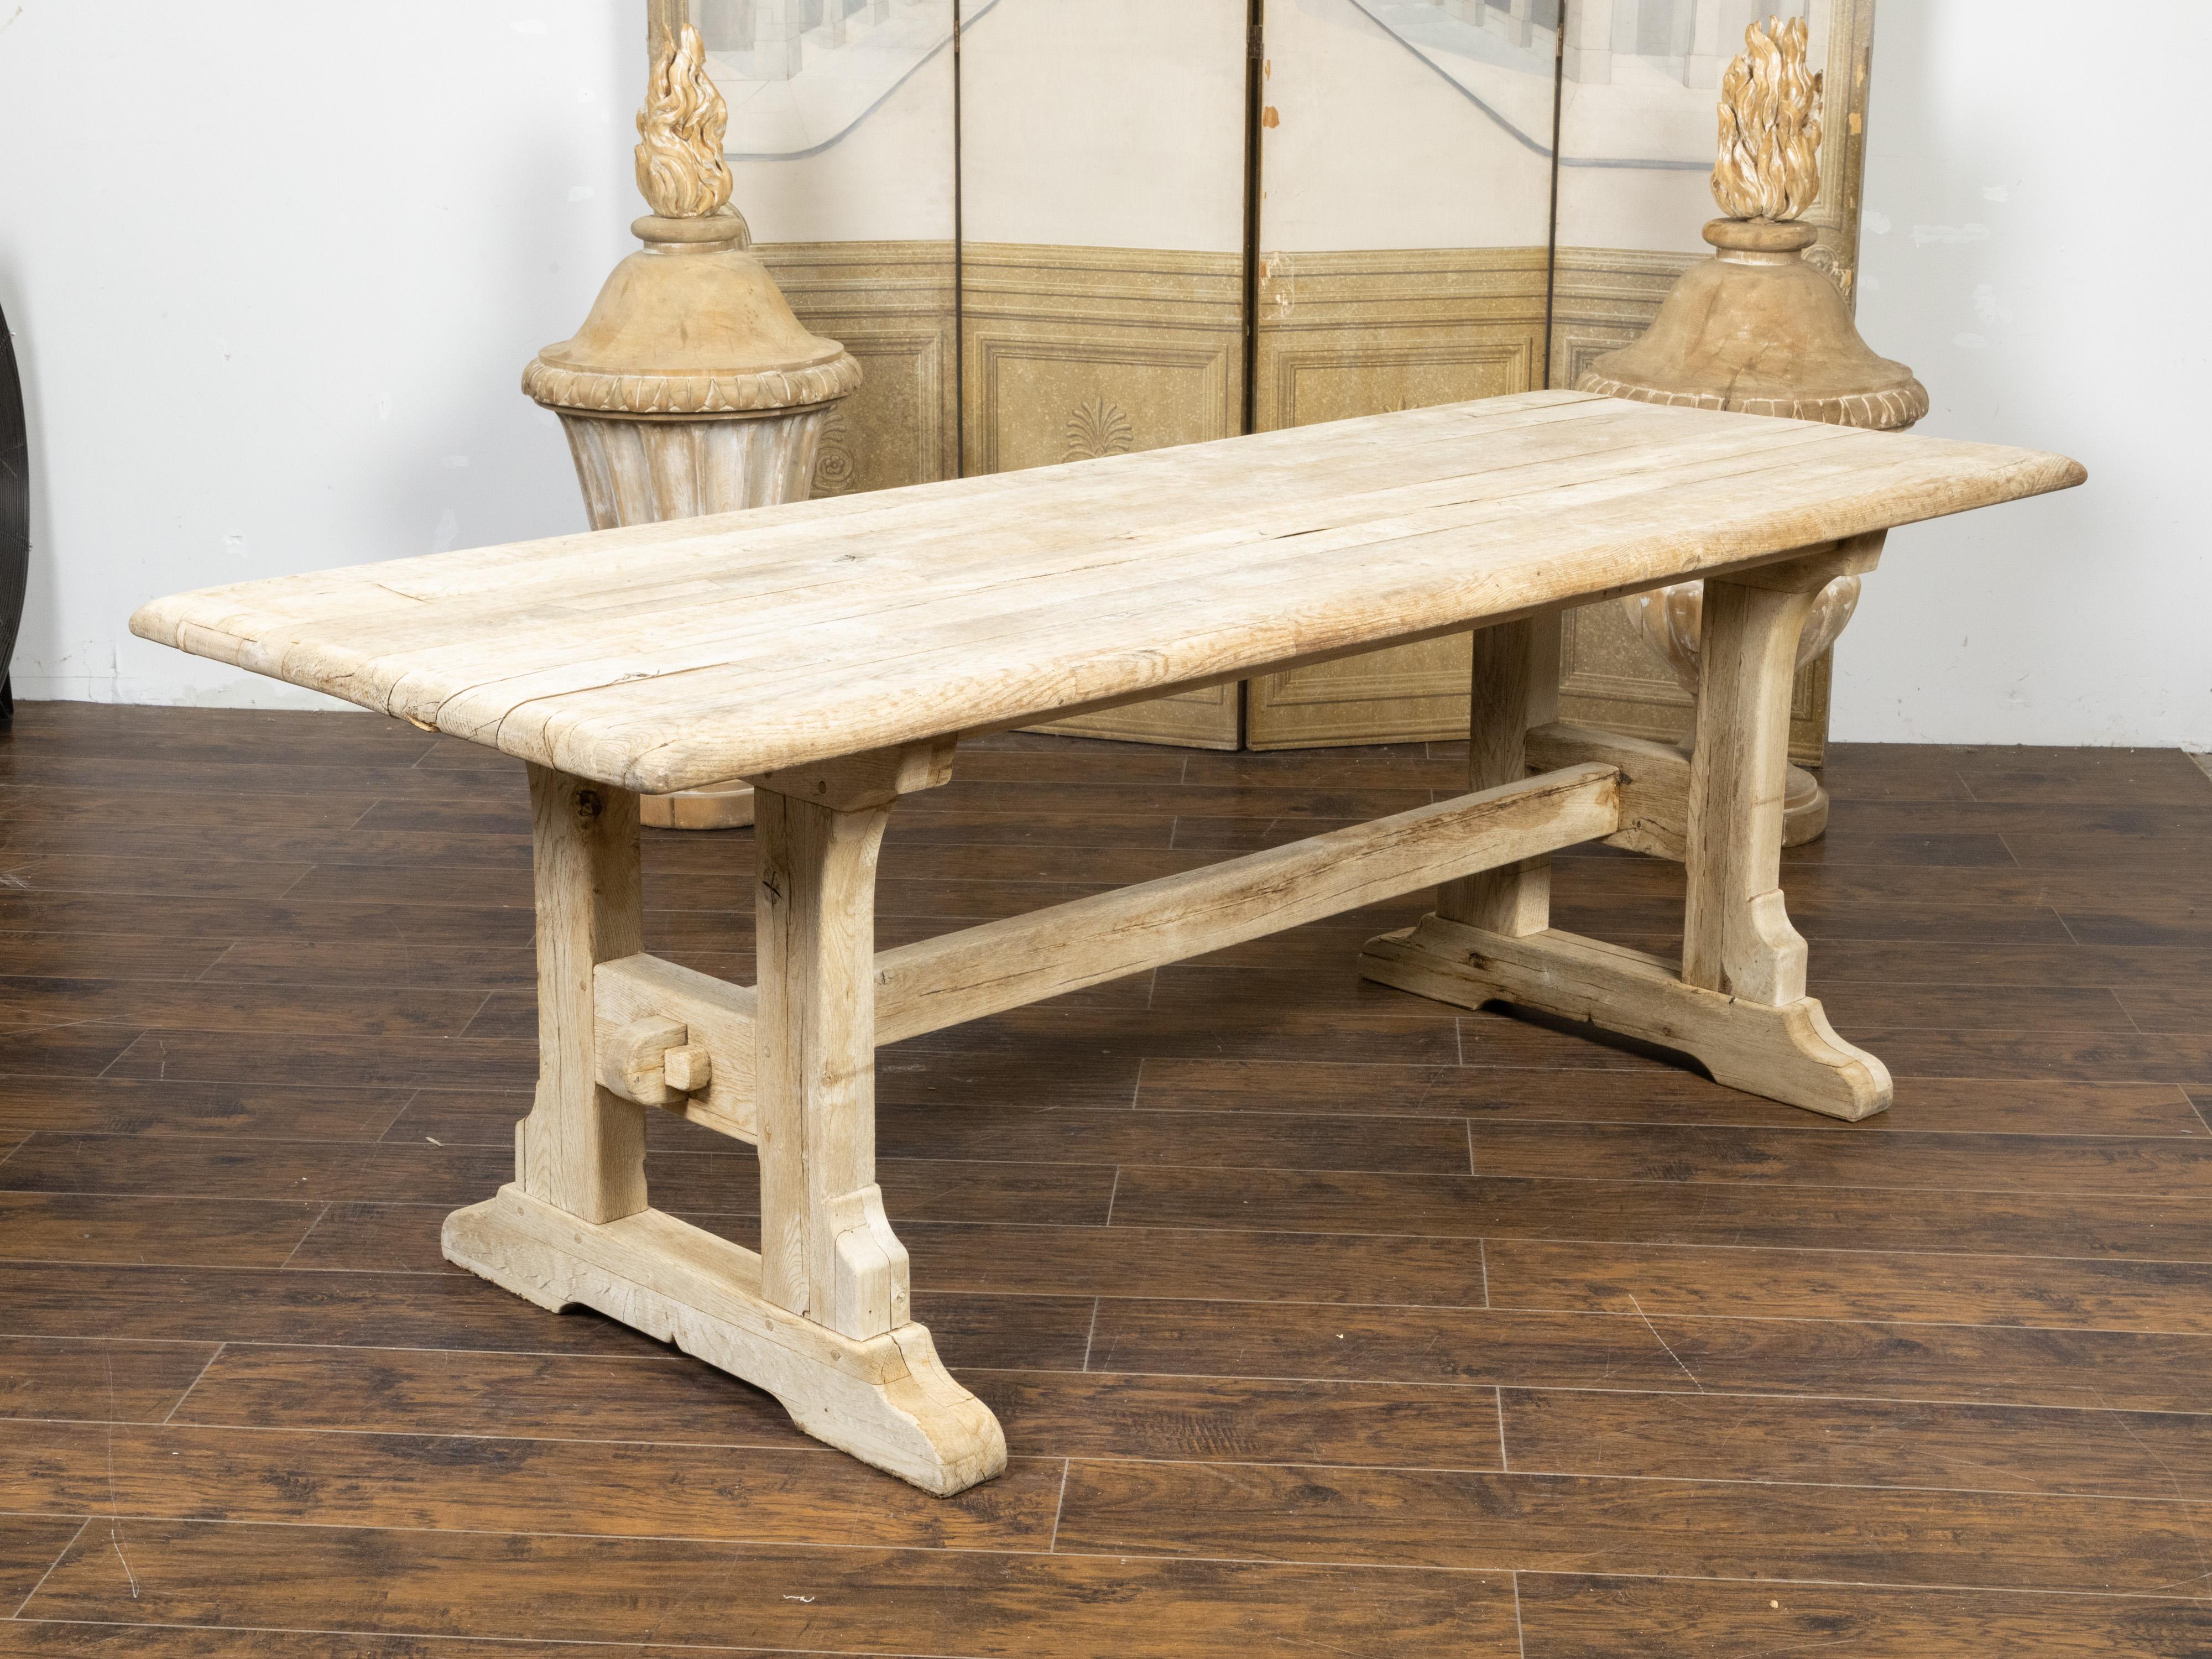 Rustic English 19th Century Natural Wood Farm Table with Trestle Base For Sale 7